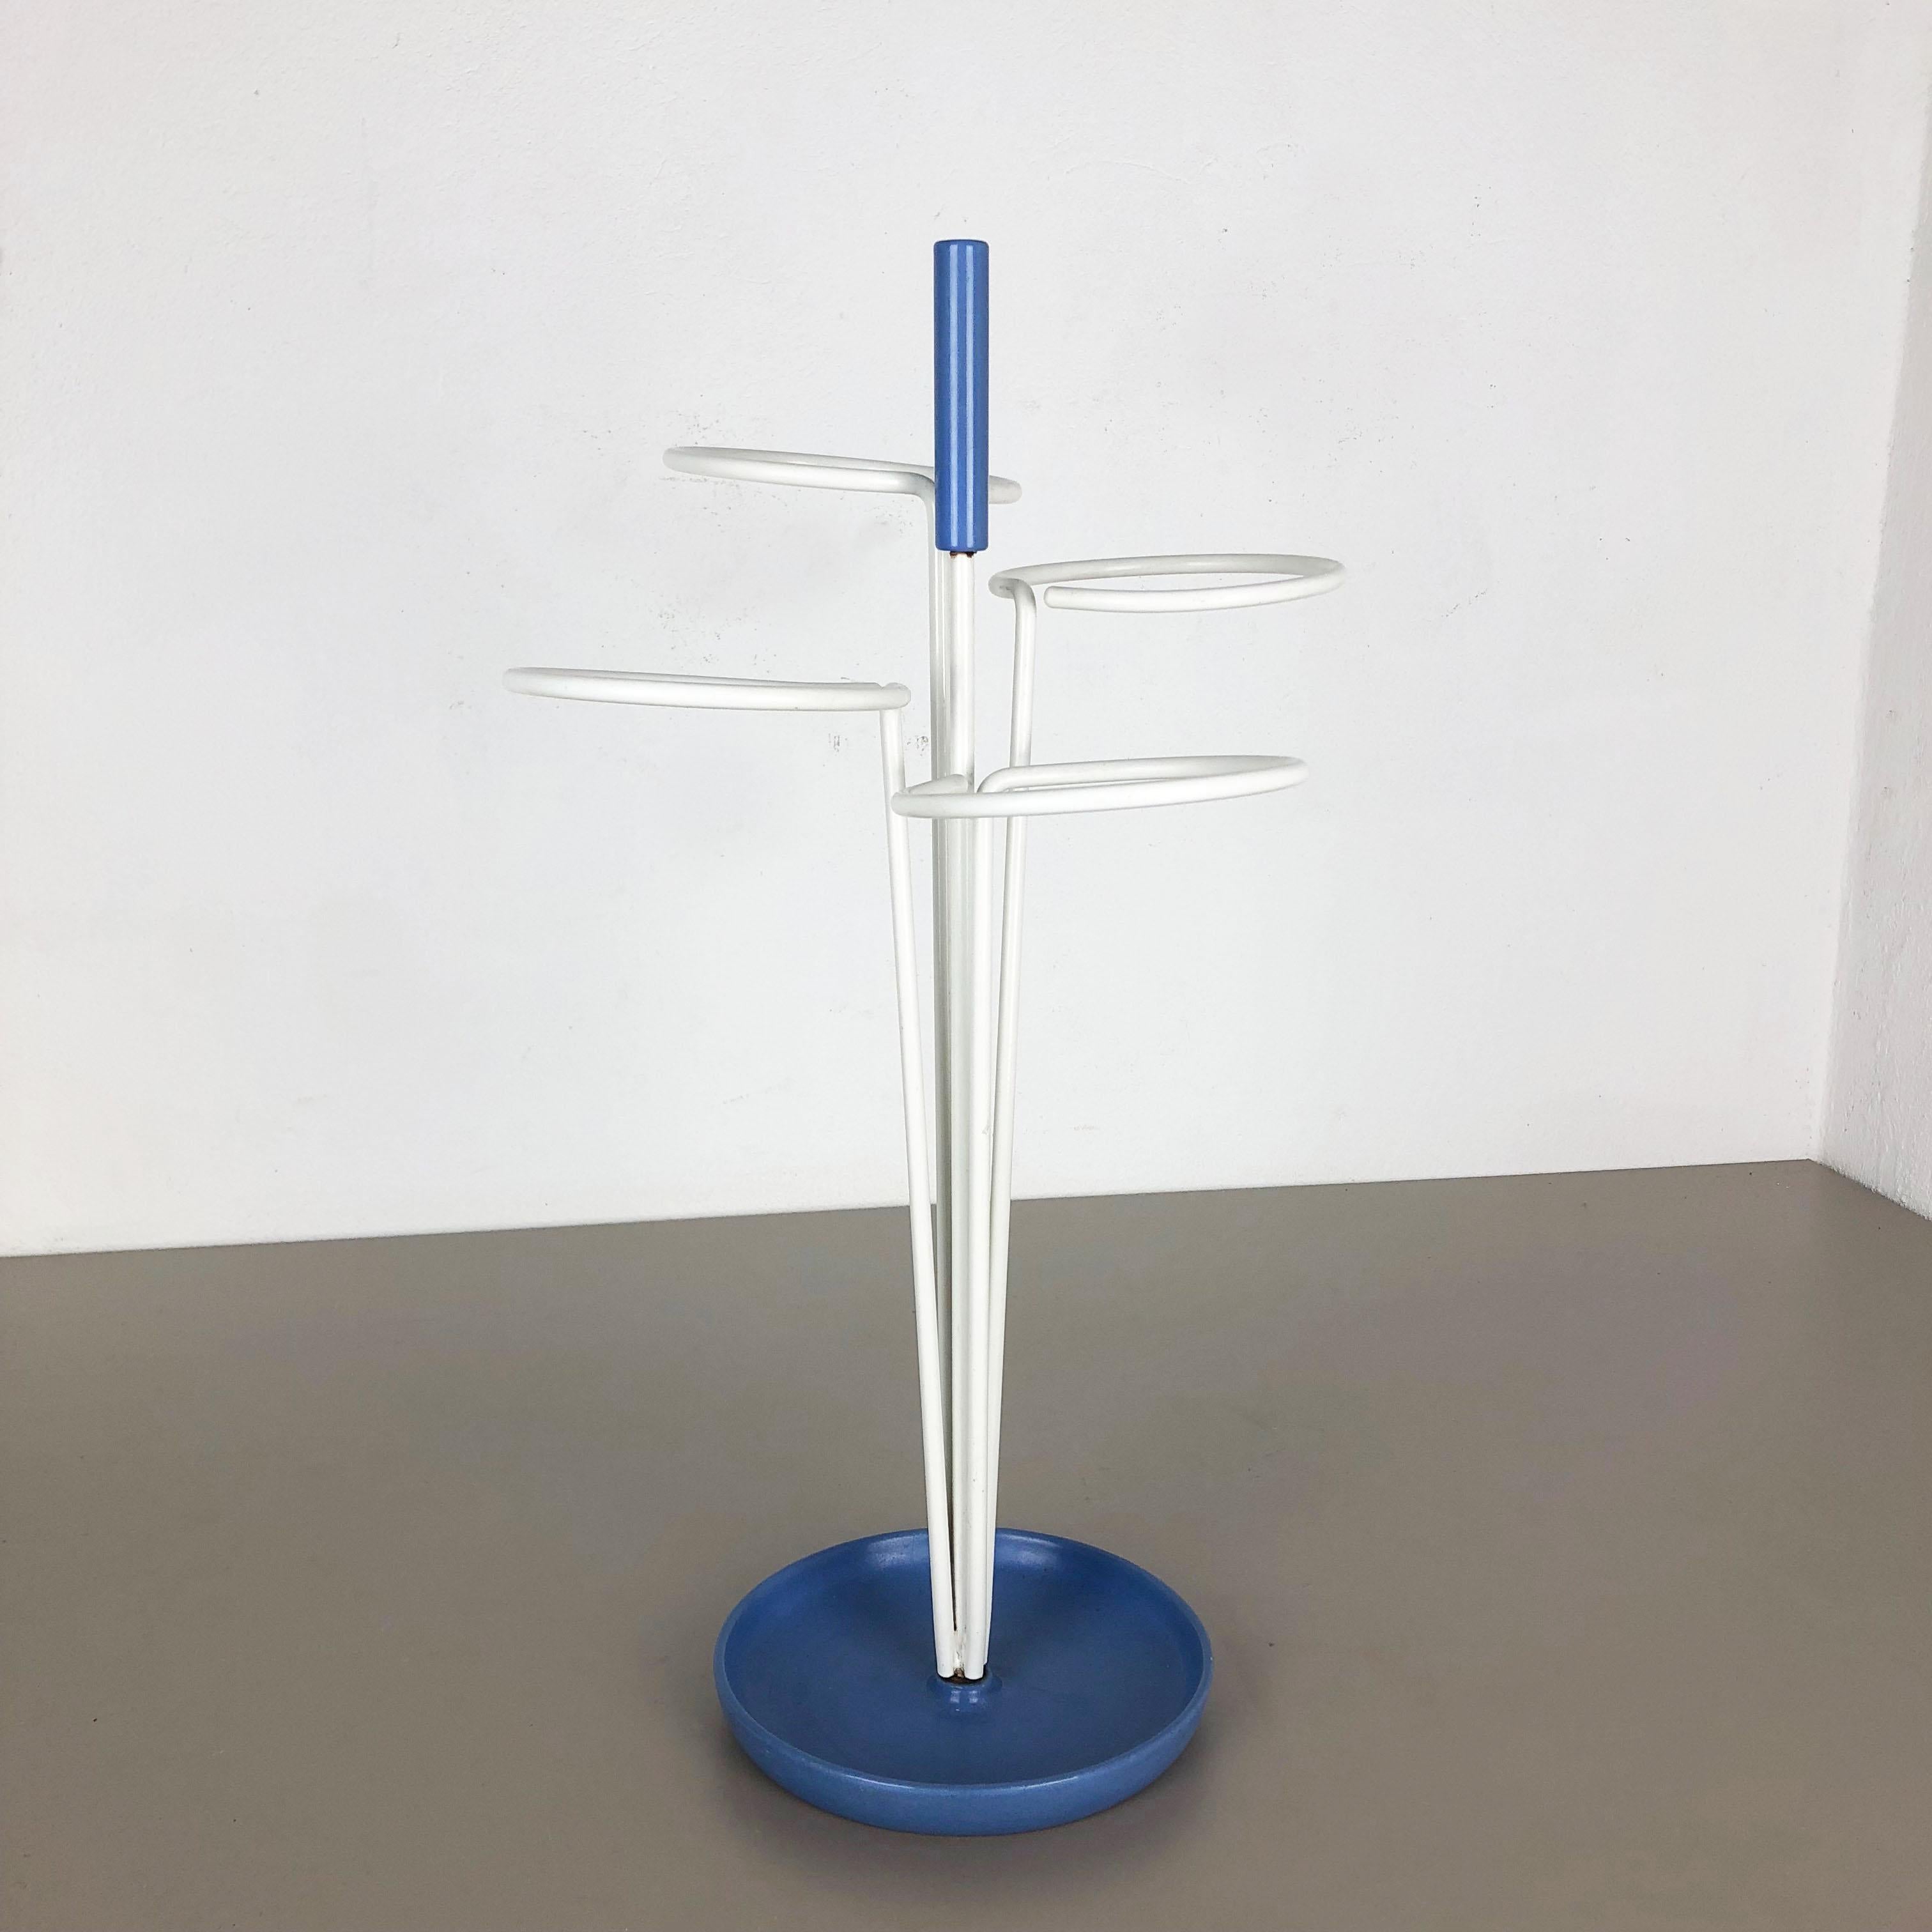 Article:

Umbrella stand


Origin:

Germany


Age:

1960s


This original vintage umbrella stand was produced in the 1960s in Germany. It is made of solid metal with white lacquered loop elements for umbrellas at the top and upright